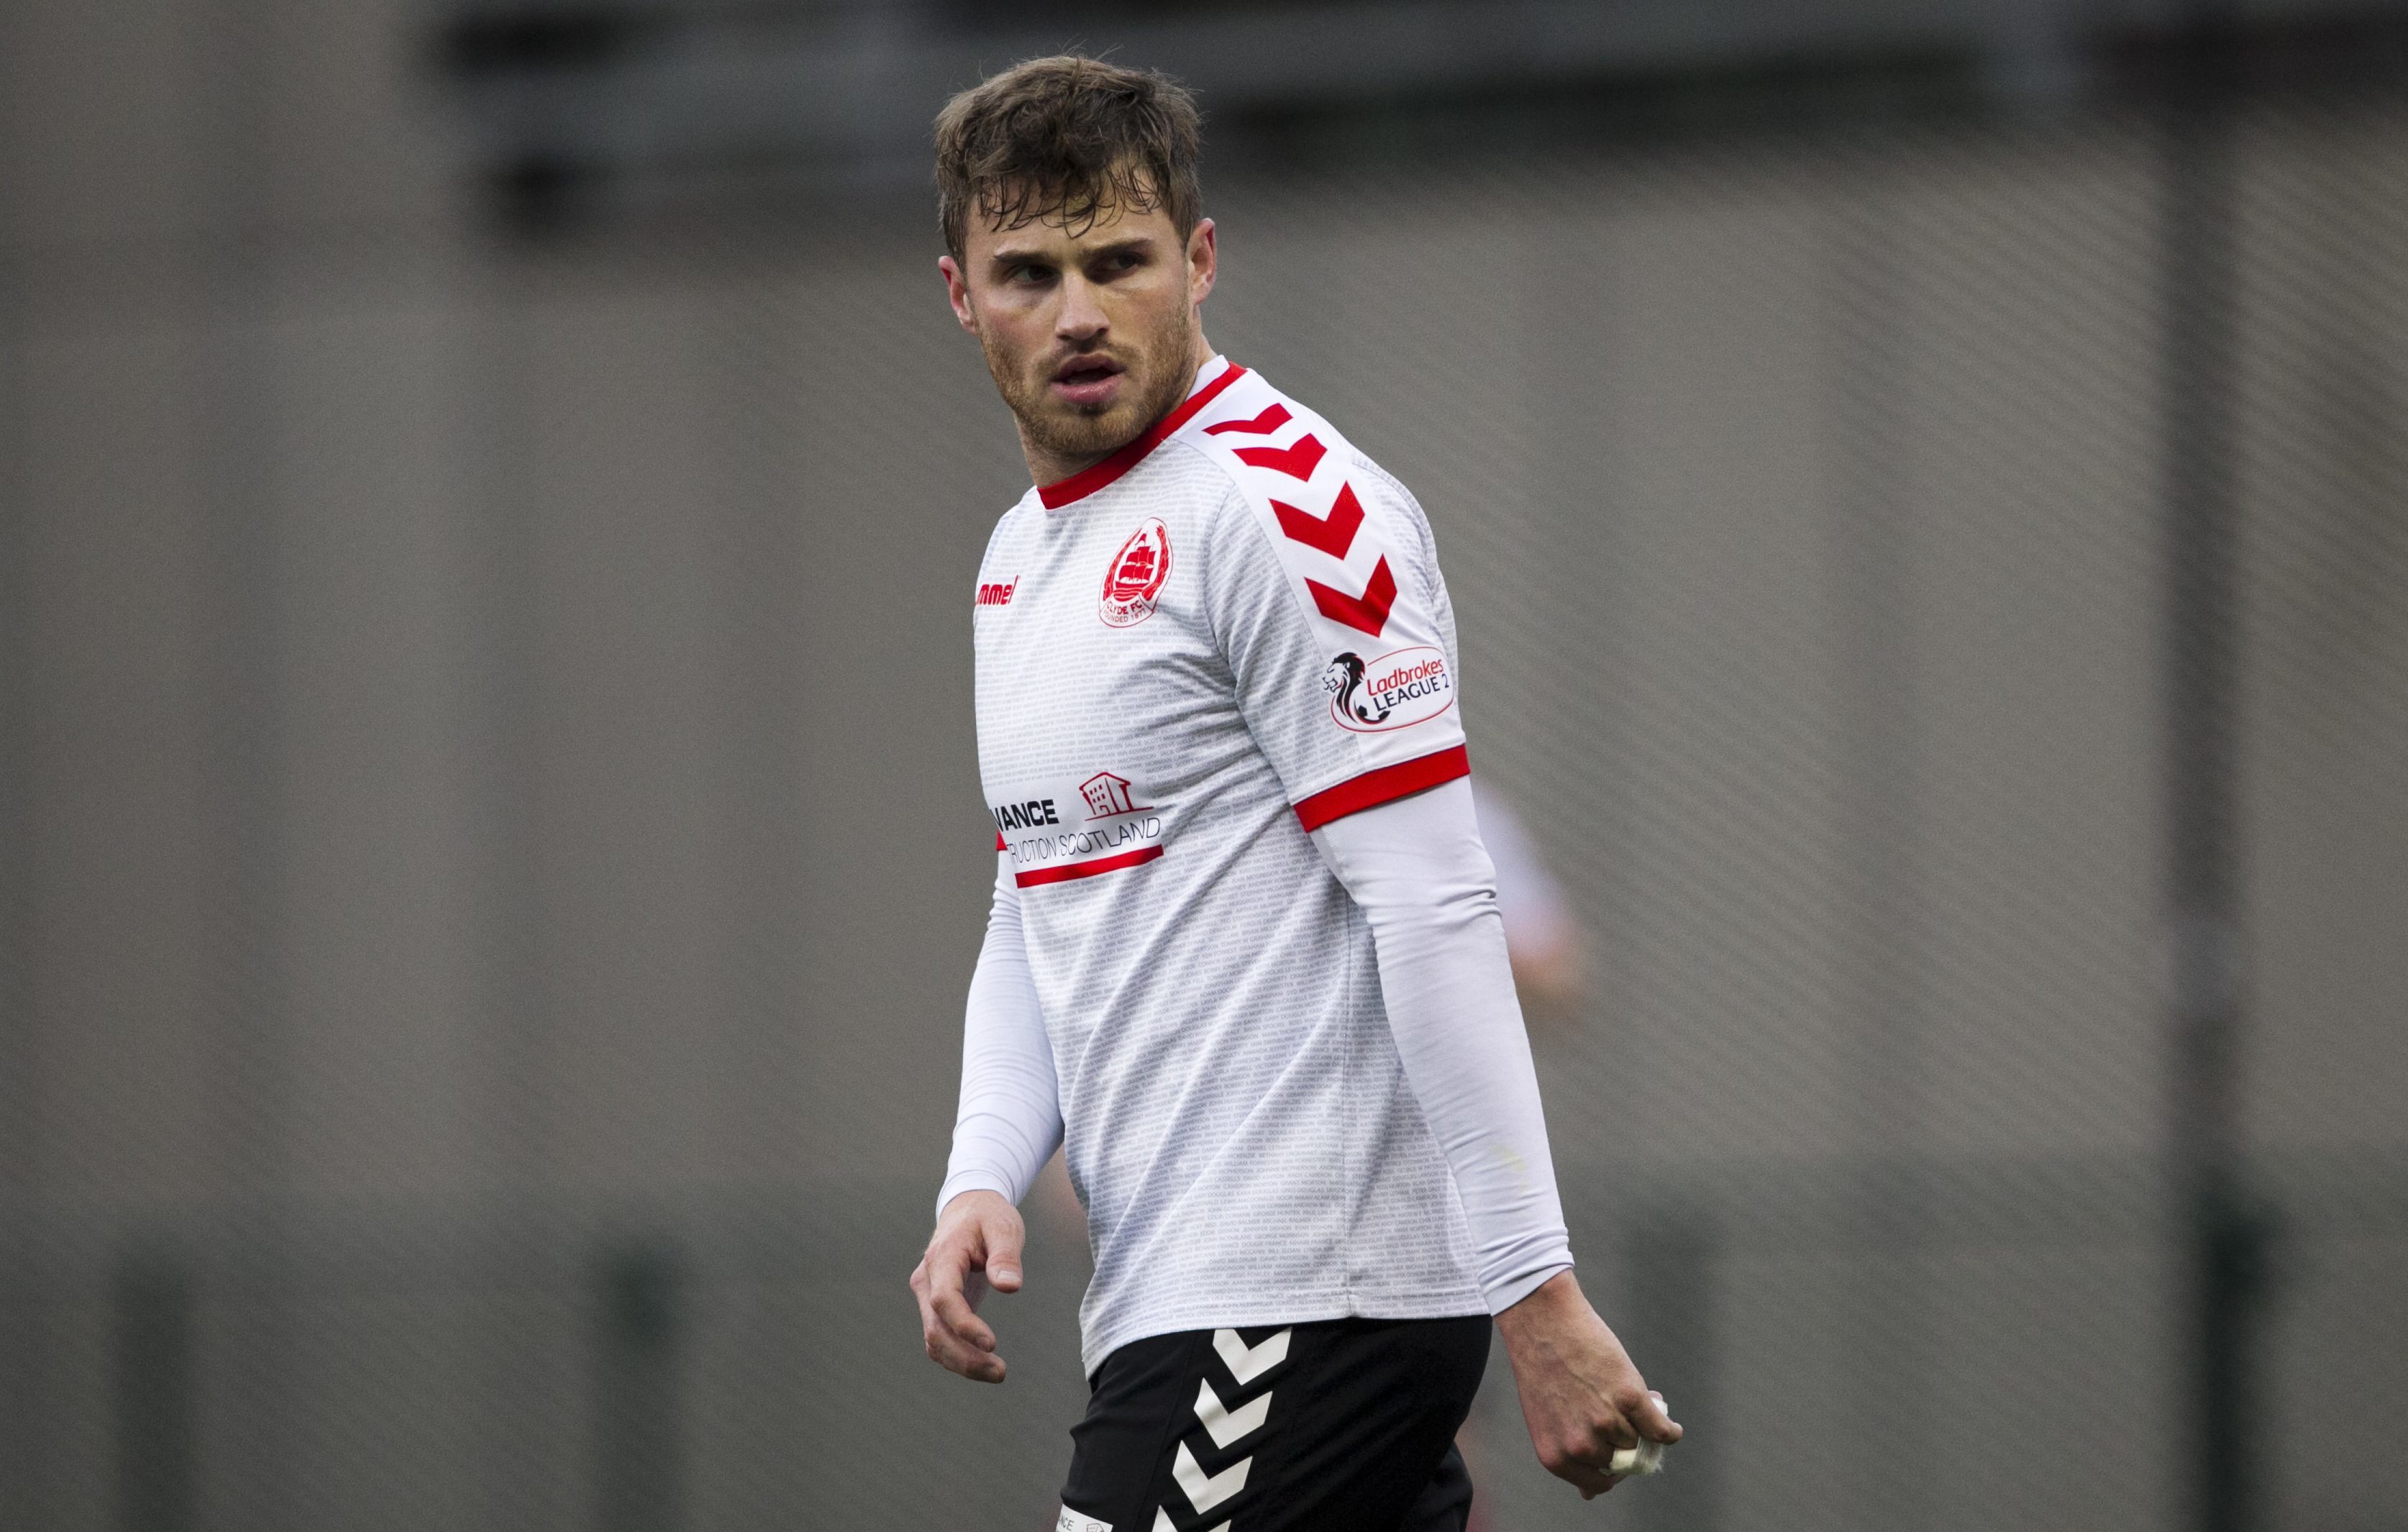 David Goodwillie in action for Clyde FC (Andrew Cawley / DC Thomson)